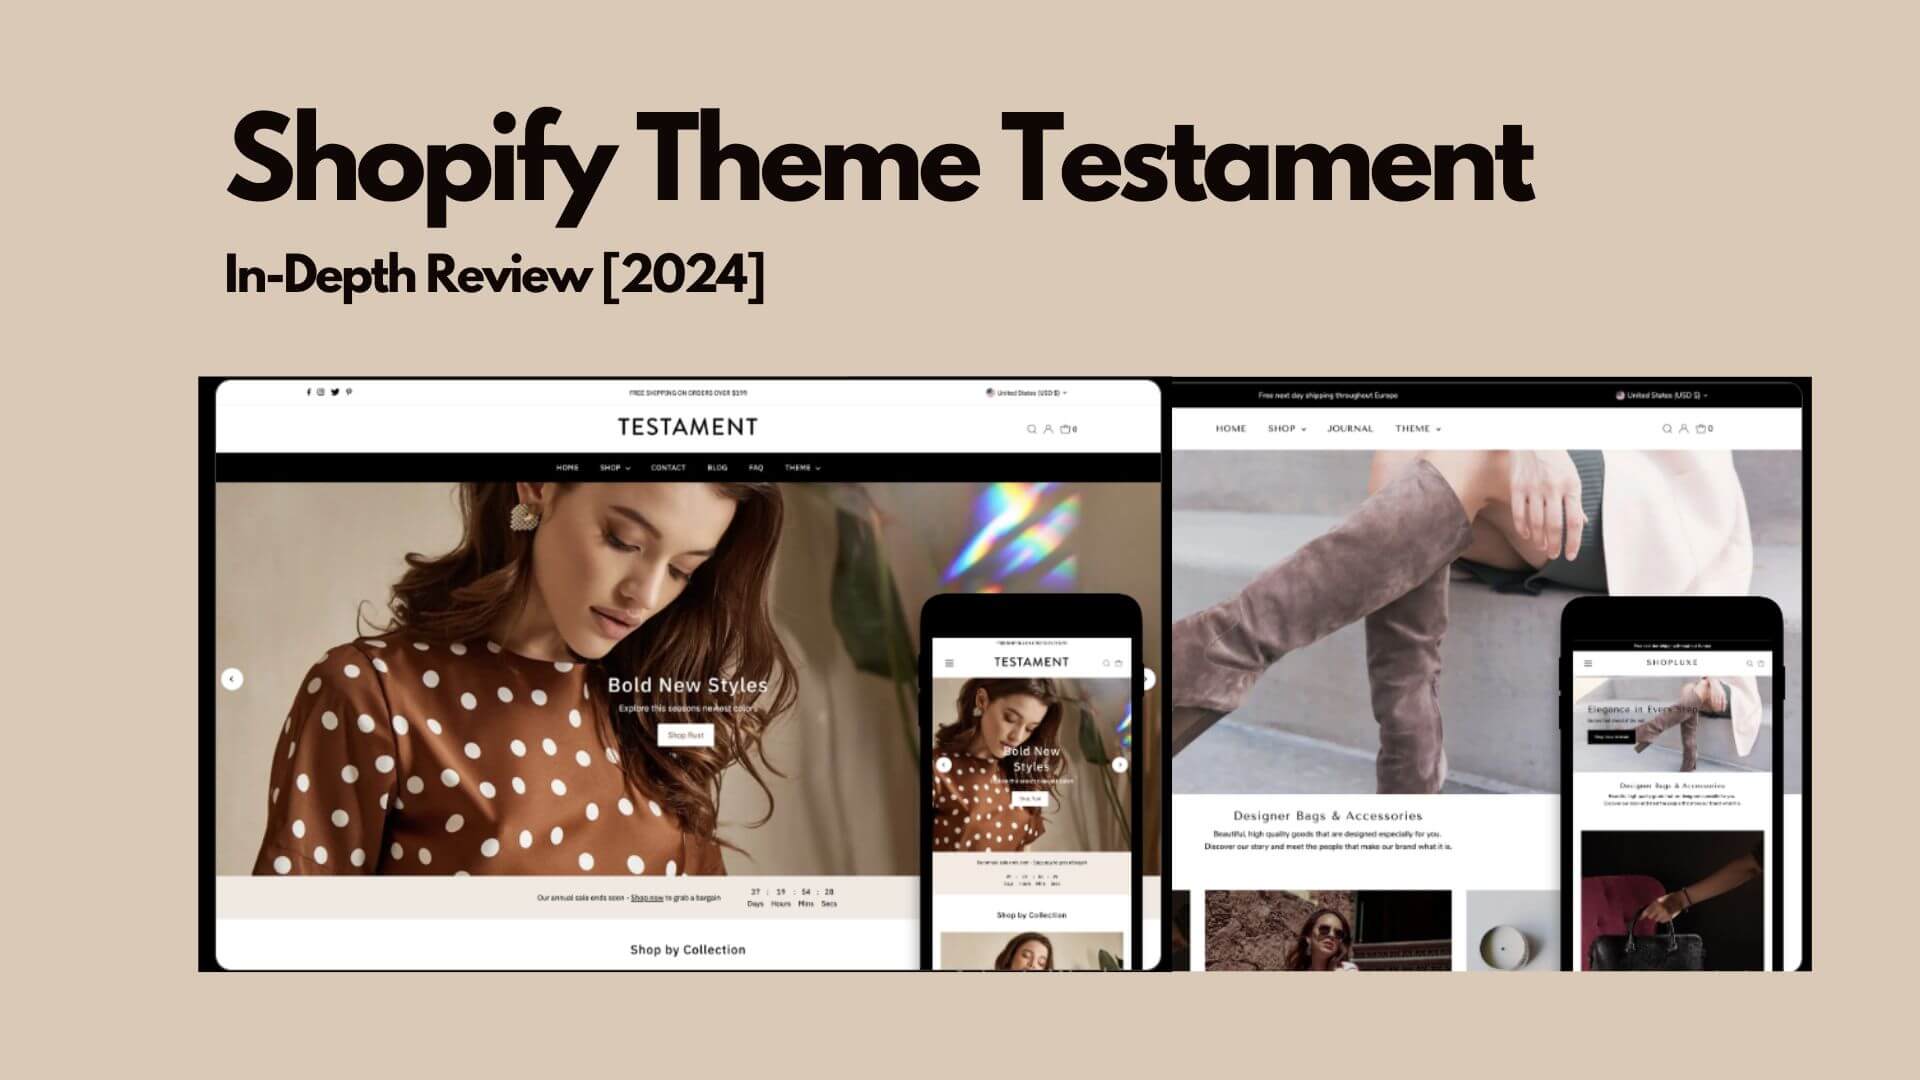 Shopify Theme Testament: In-Depth Review for Each Feature – 2024